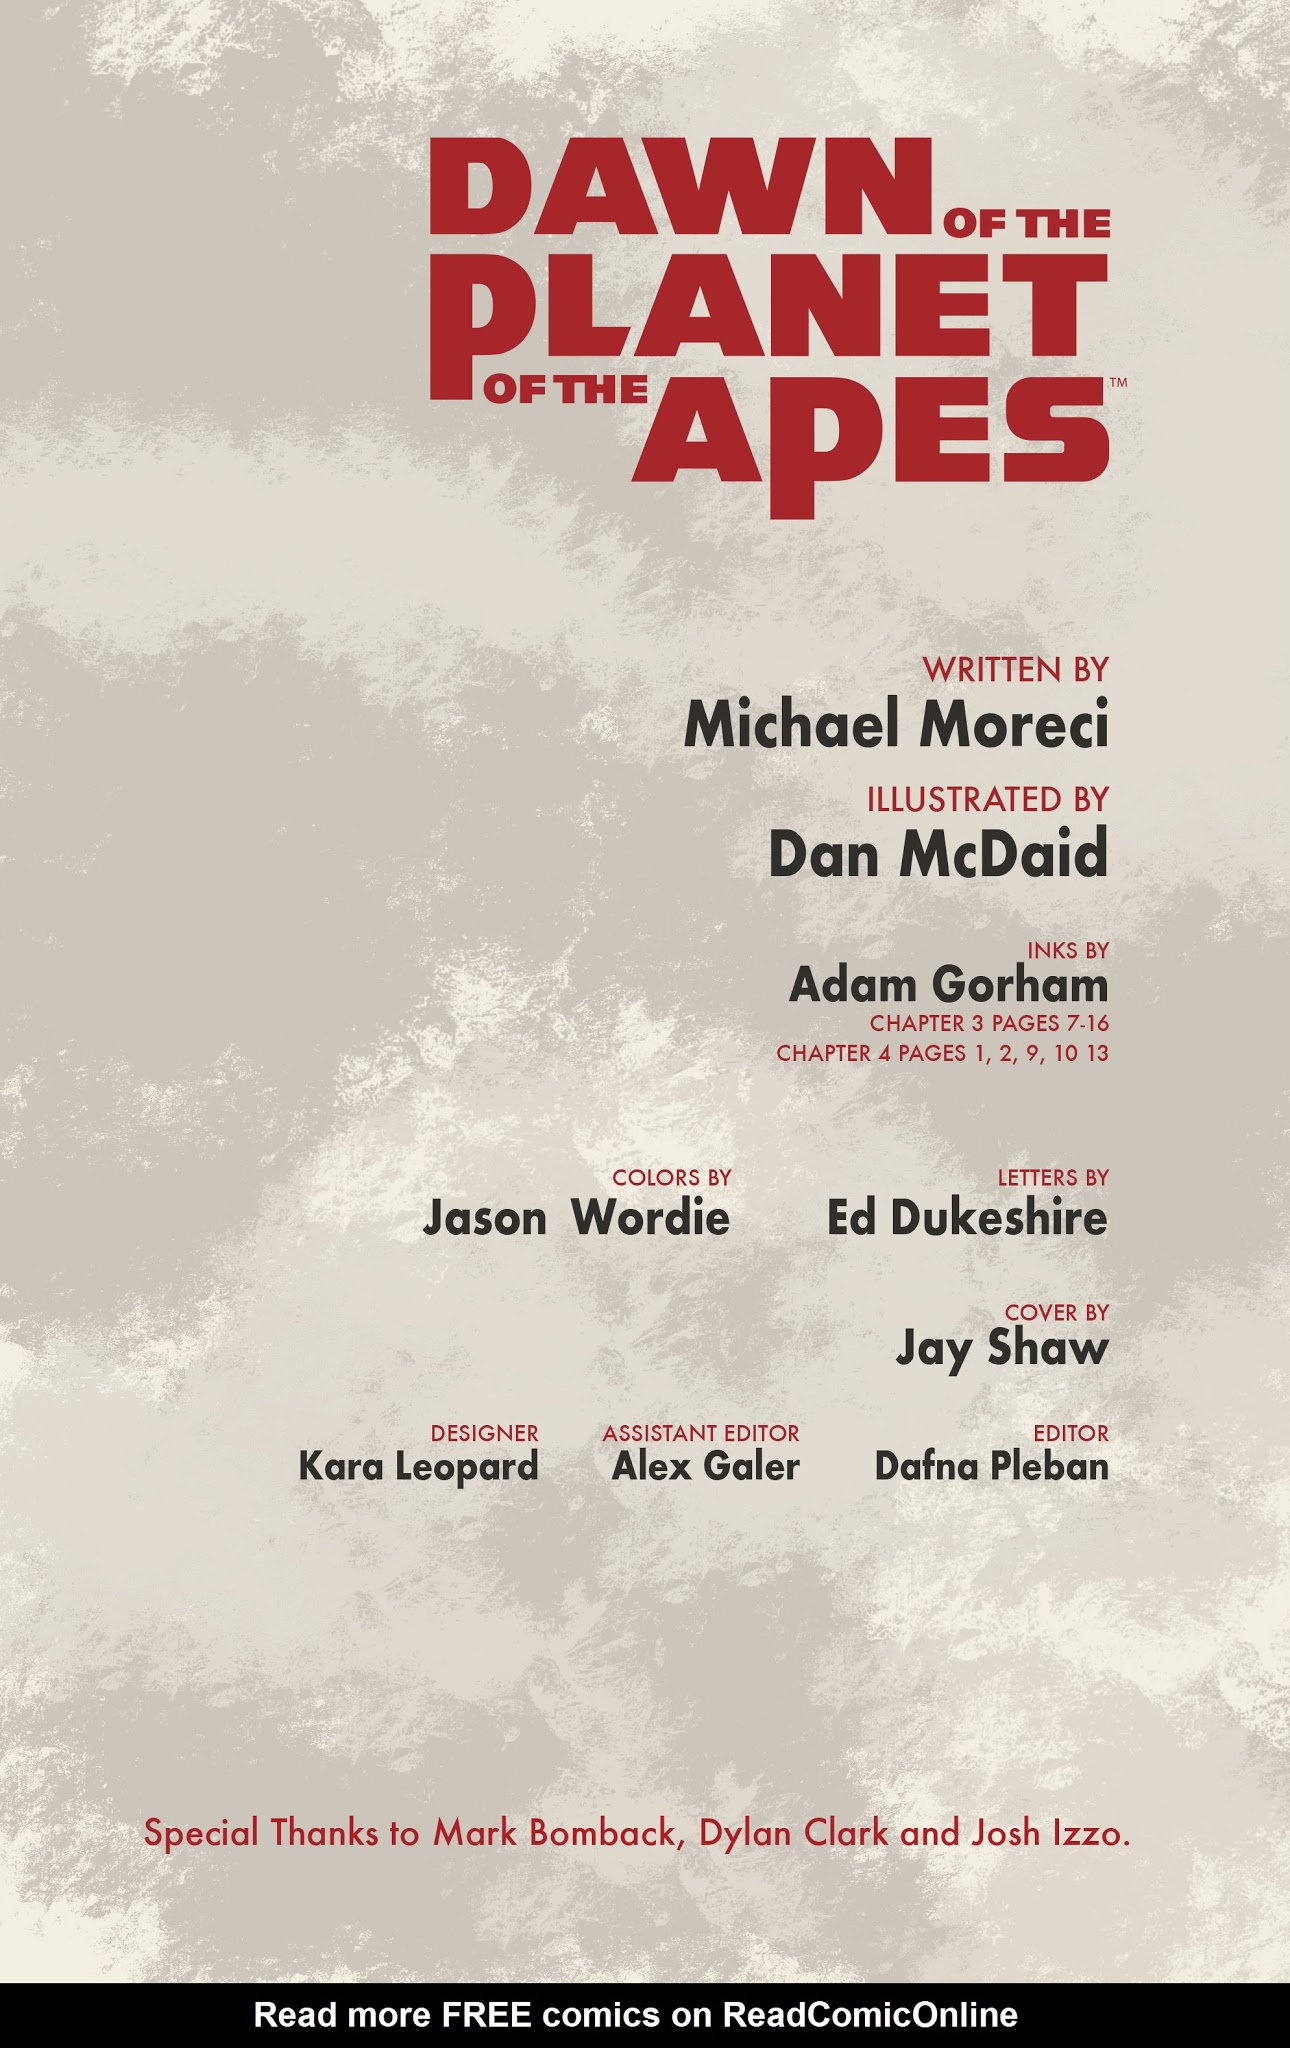 Read online Dawn of the Planet of the Apes comic -  Issue # TPB - 4